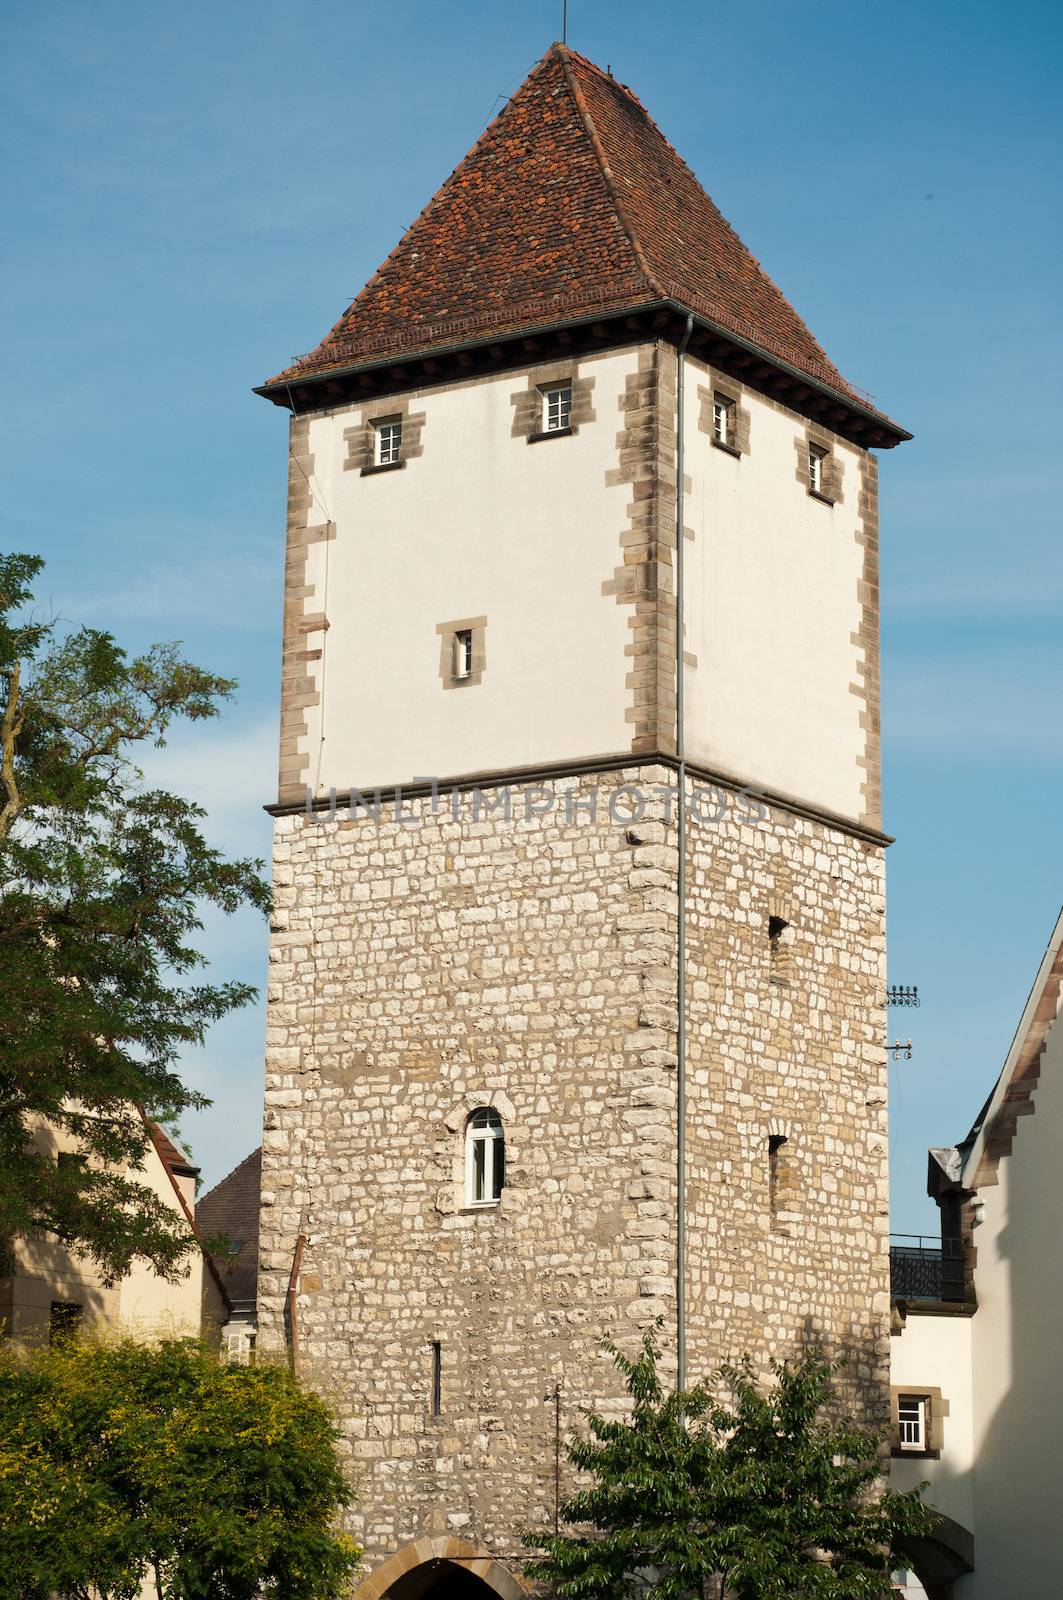 Nessel tower,  in Mulhouse - Alsace - France